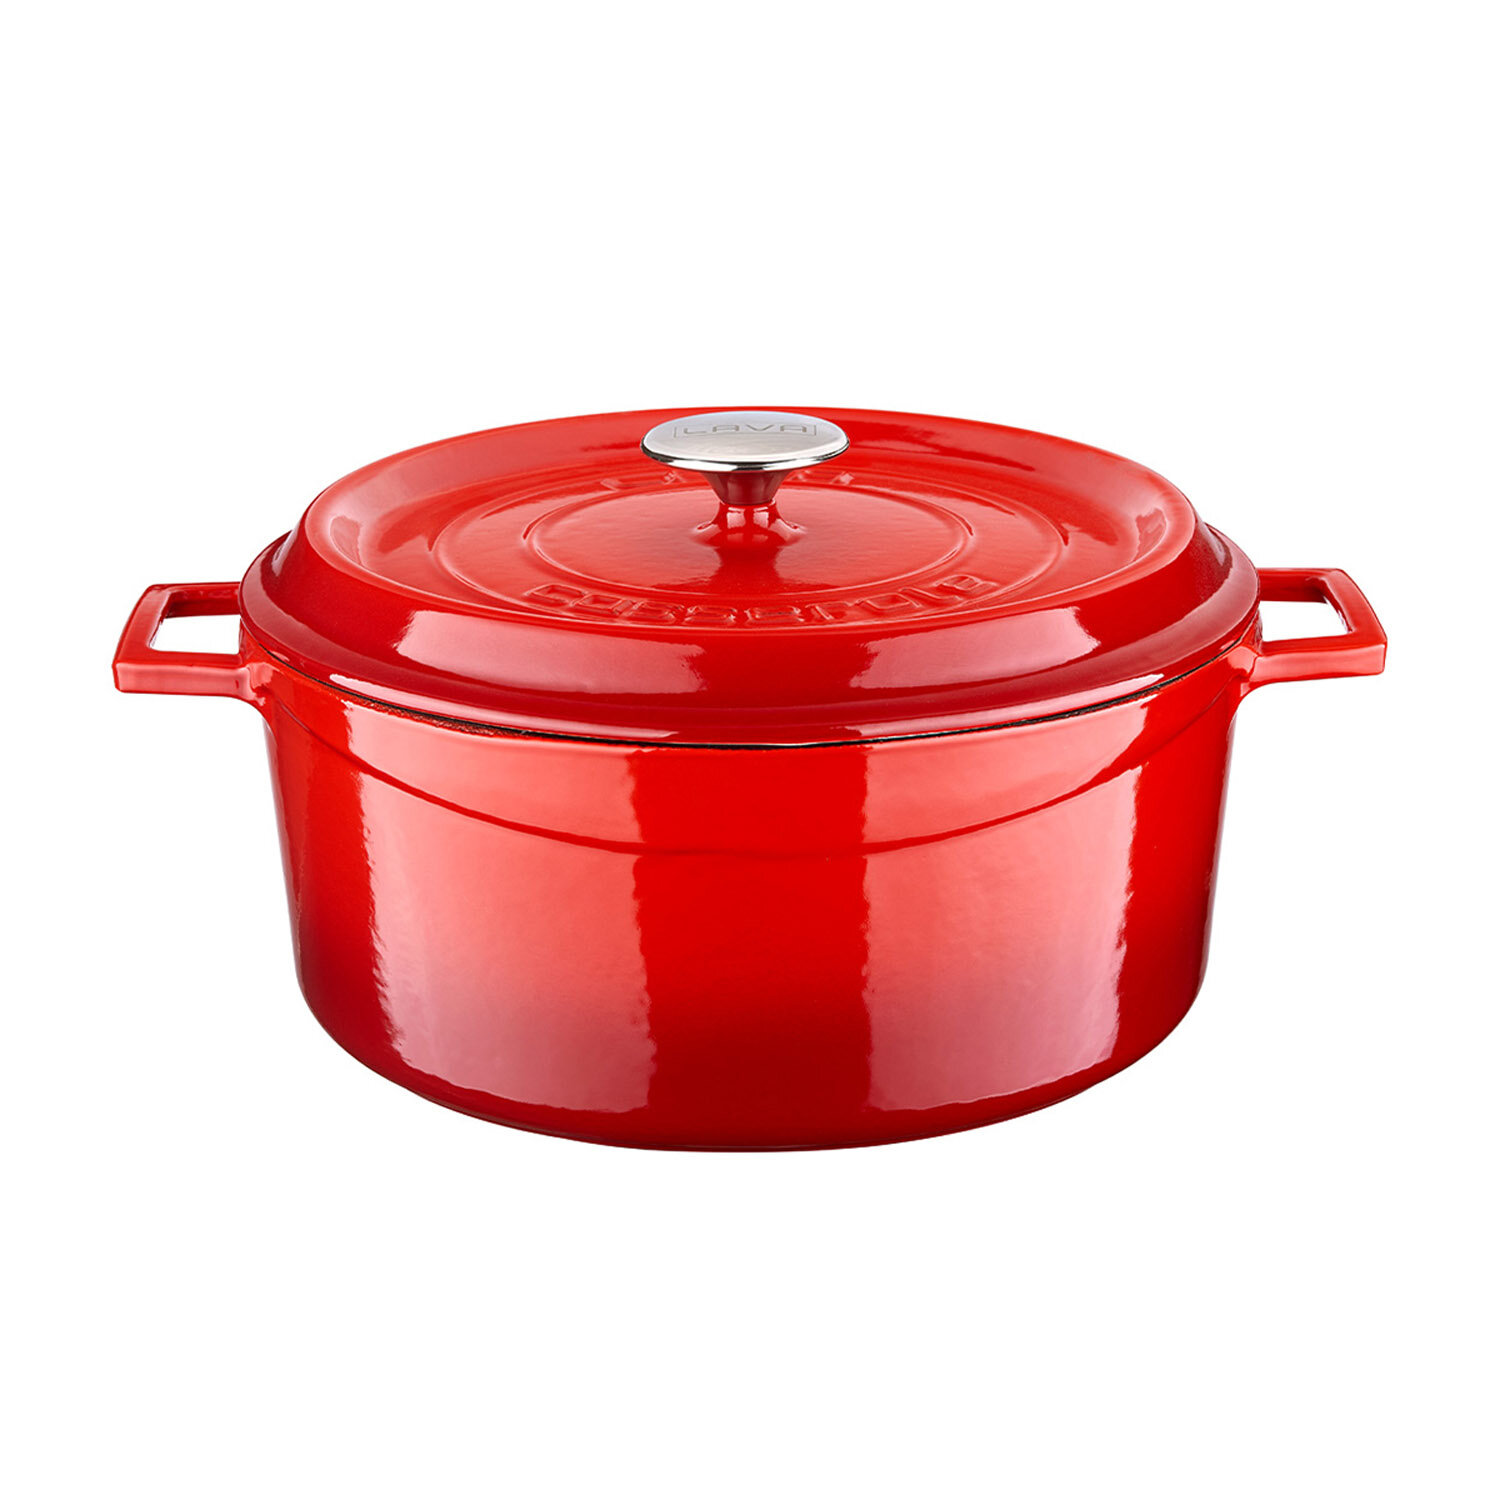 Taste of Home 7 Quart Enameled Cast Iron Dutch Oven with Grill Lid, 7 Quart  - Foods Co.